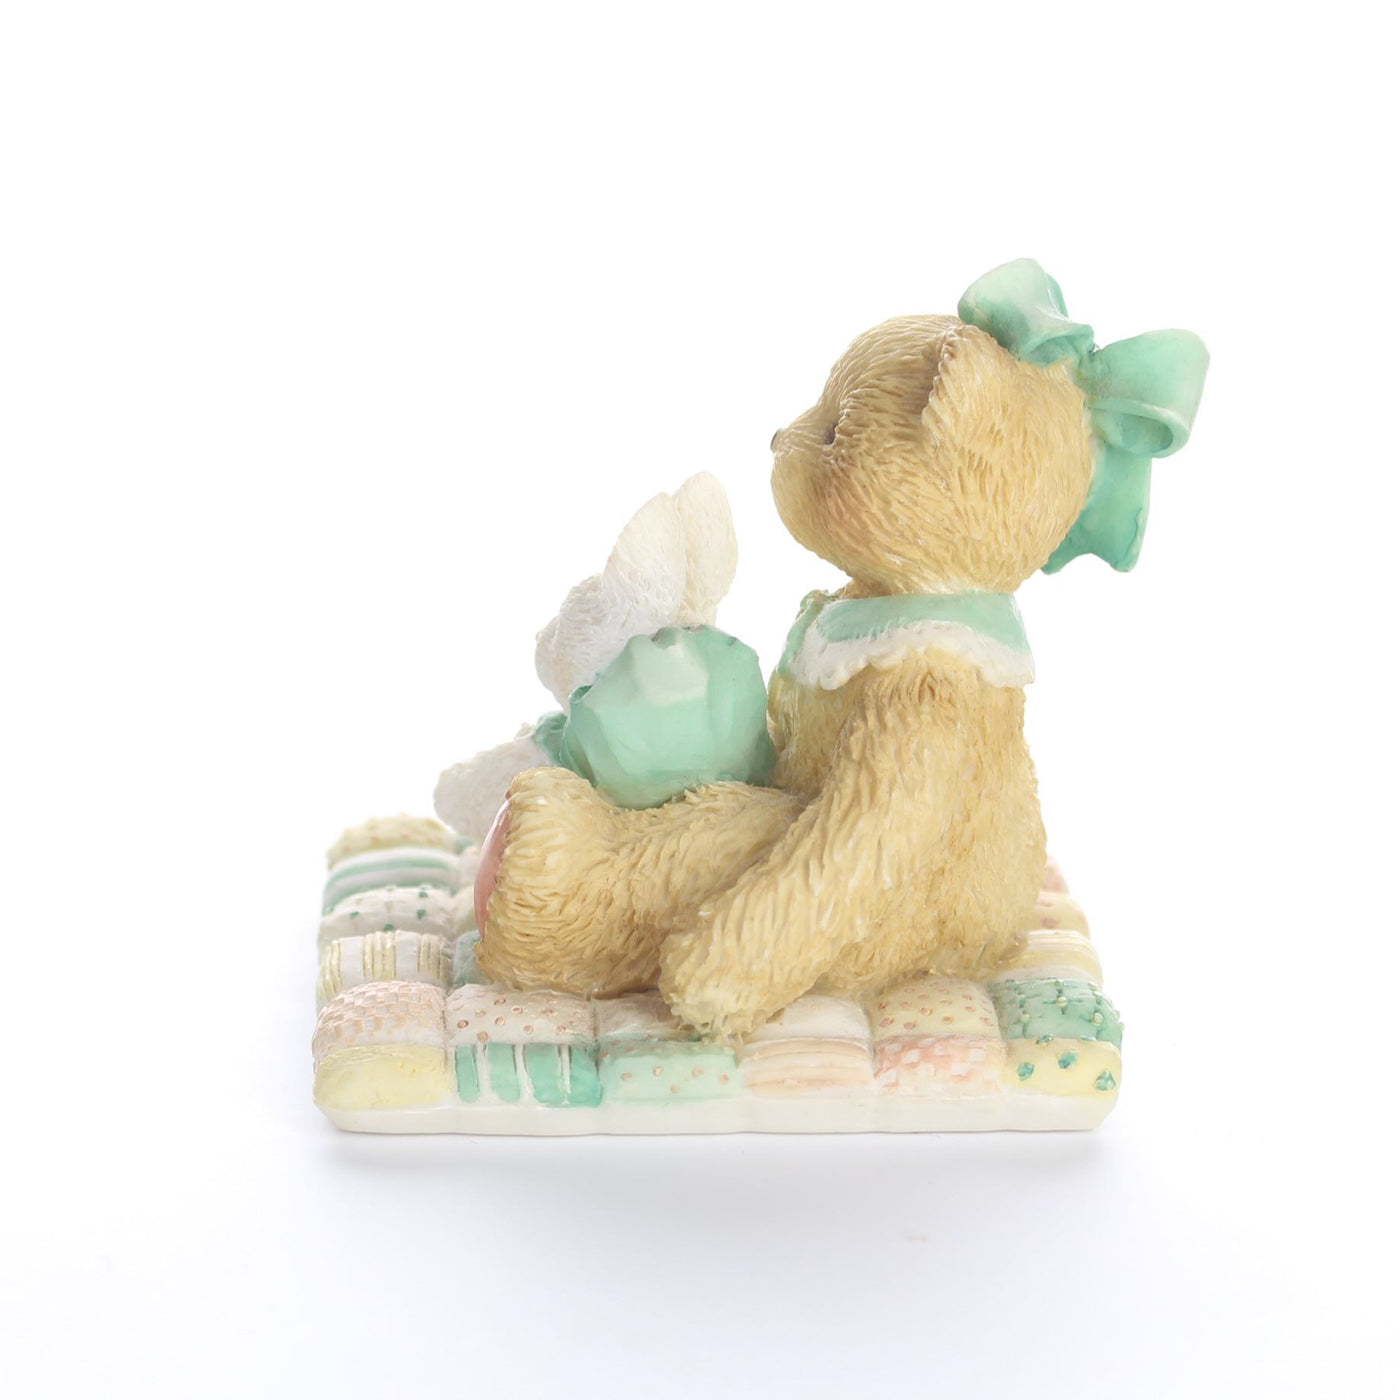 Cherished Teddies Vintage Easter Figurine Camille I'd Be Lost Without You 1991